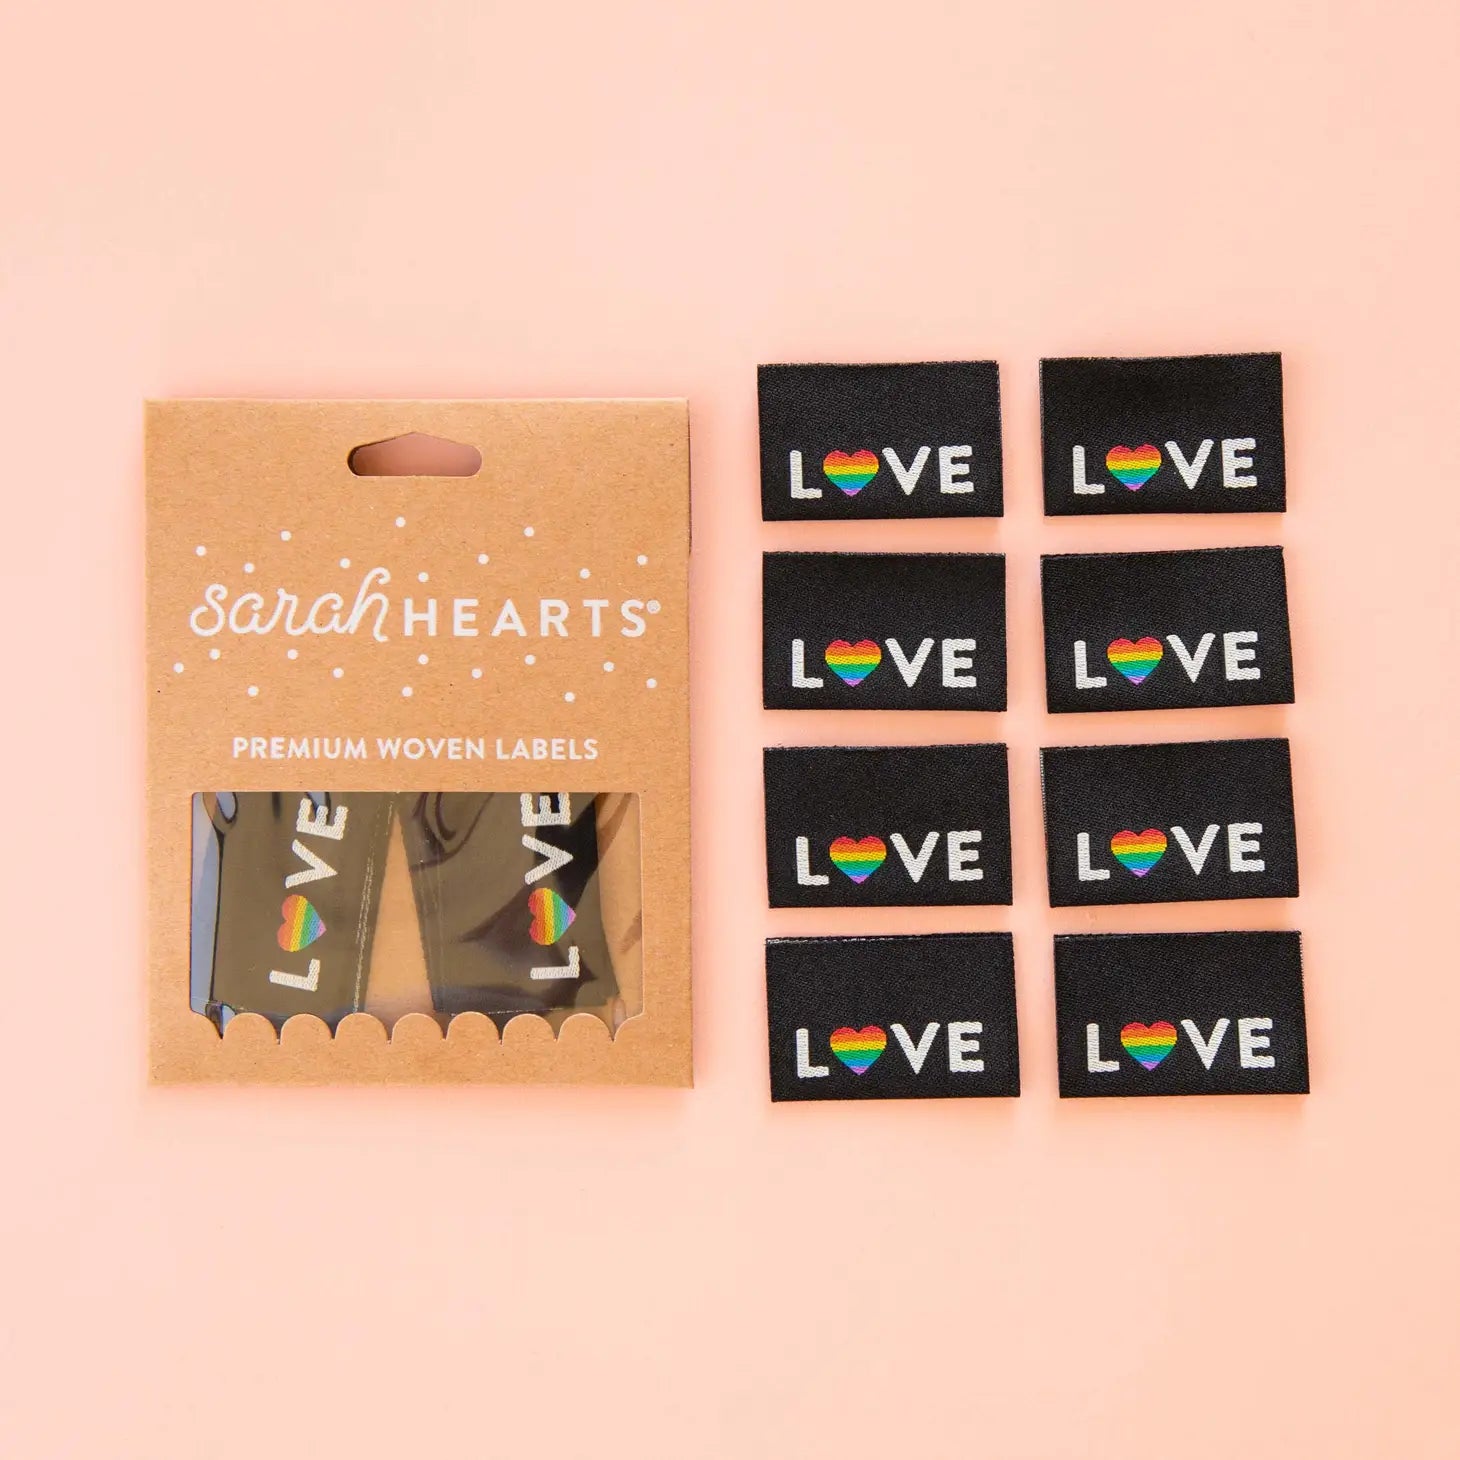 Love Pride Heart Woven Labels from Sarah Hearts - LP159